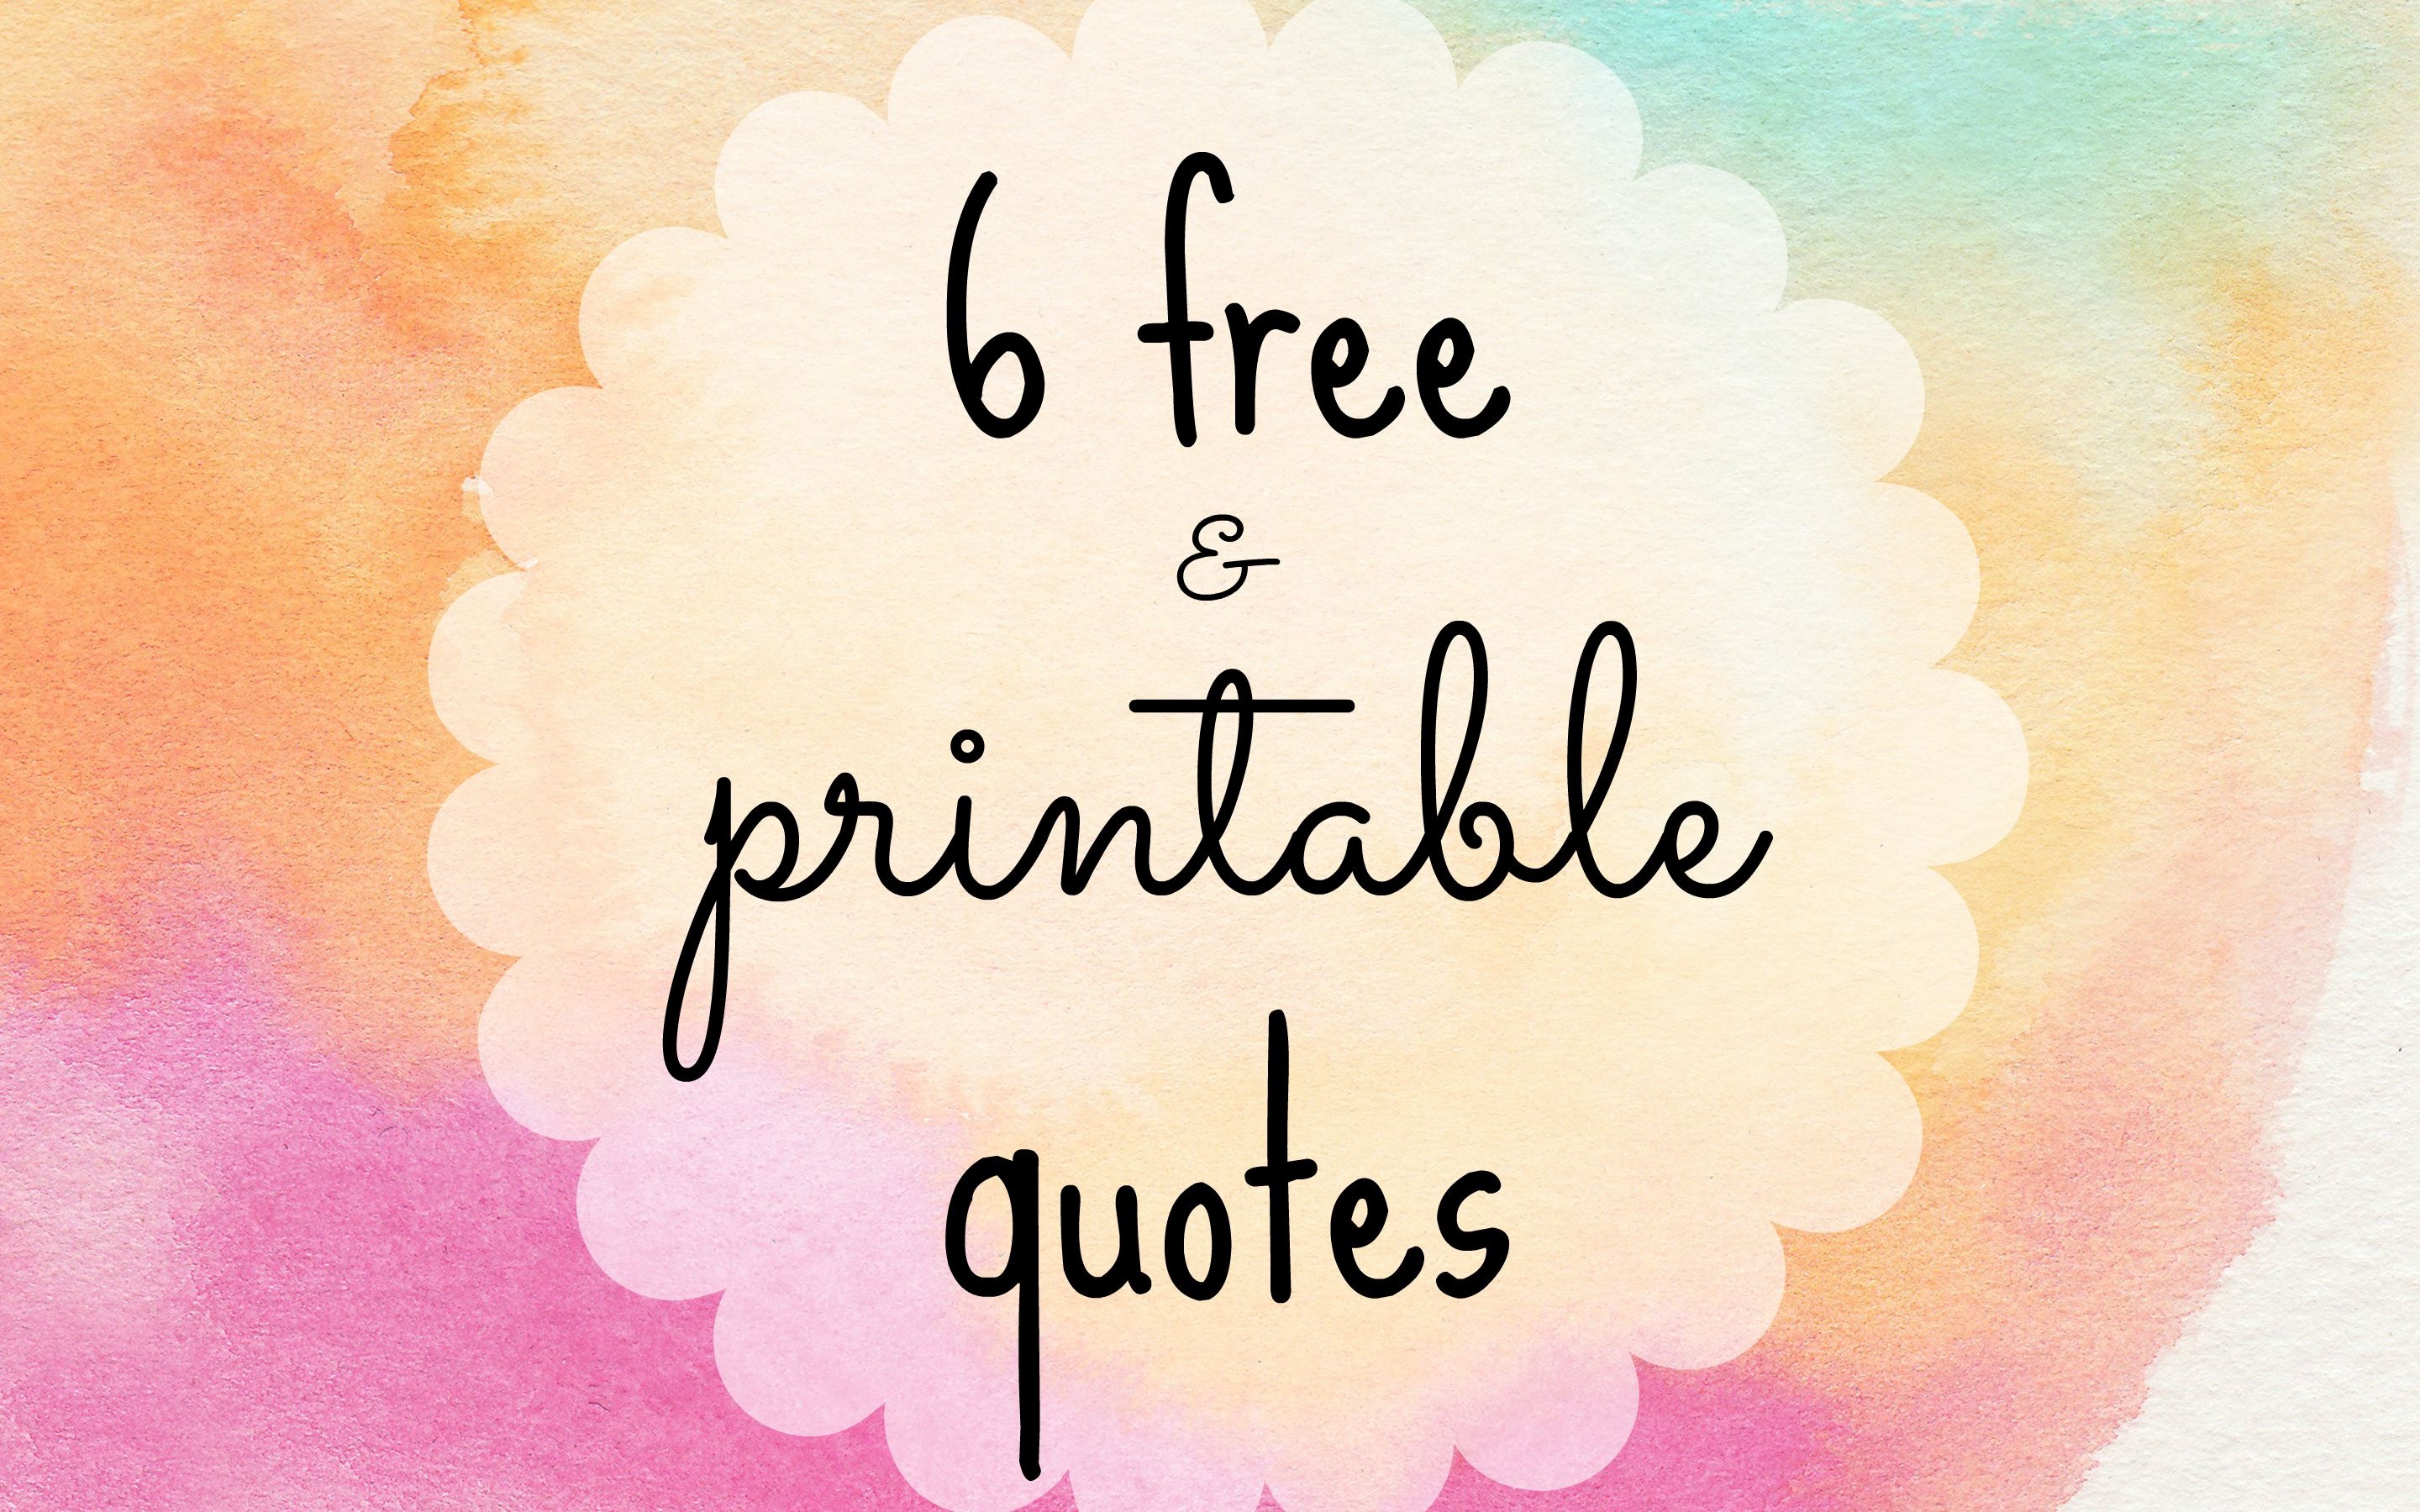 6 Free Printable Quotes To Dress Your Desk - Free Printable Quotes And Sayings